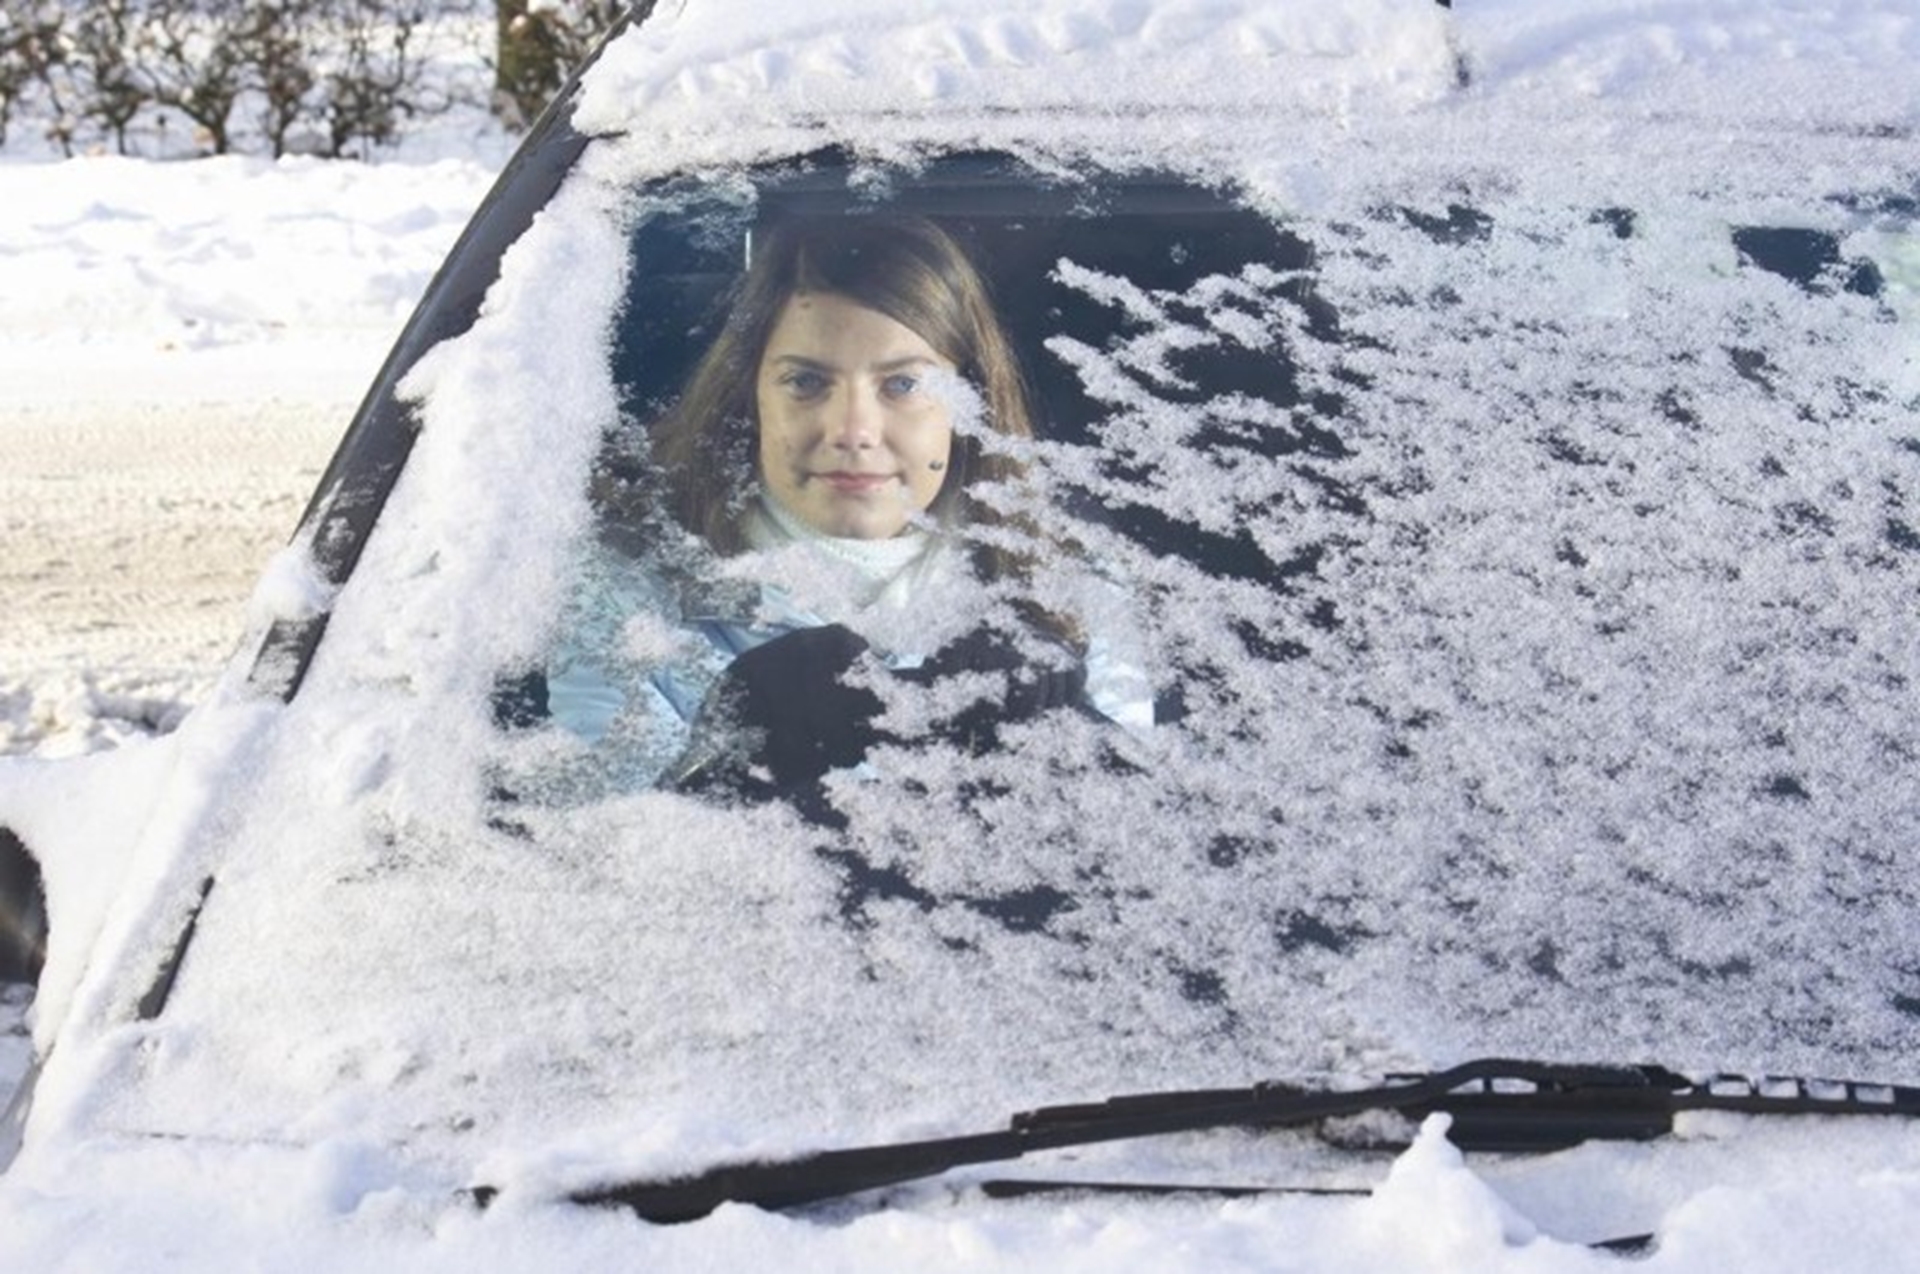 FORD CLEARS UP THE RISKS FROM FROZEN CAR WINDSCREENS THIS WINTER